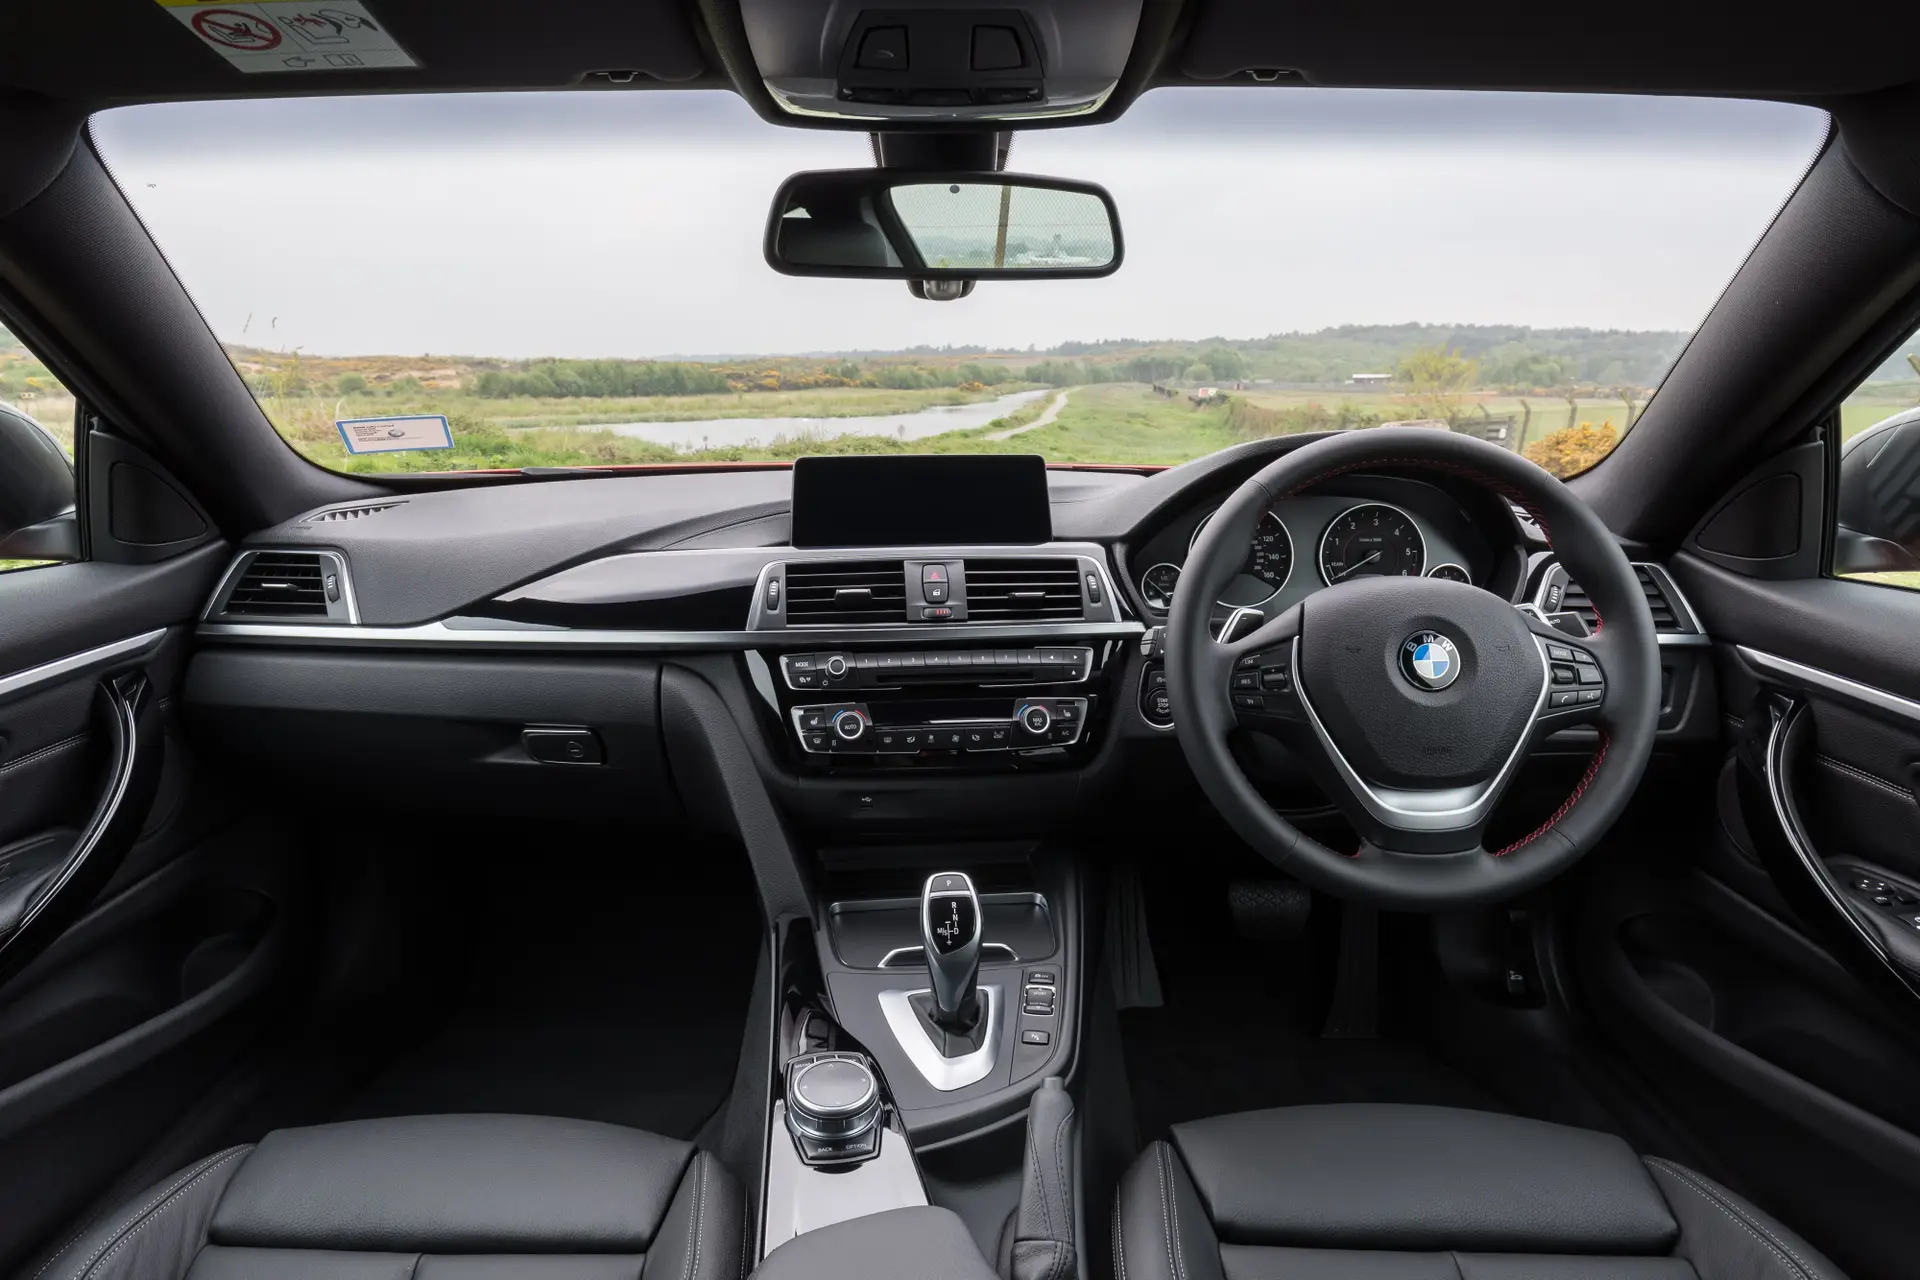 BMW 4 Series Coupe (2013-2020) Review: Interior close up photo of the BMW 4 Series Coupe dashboard 